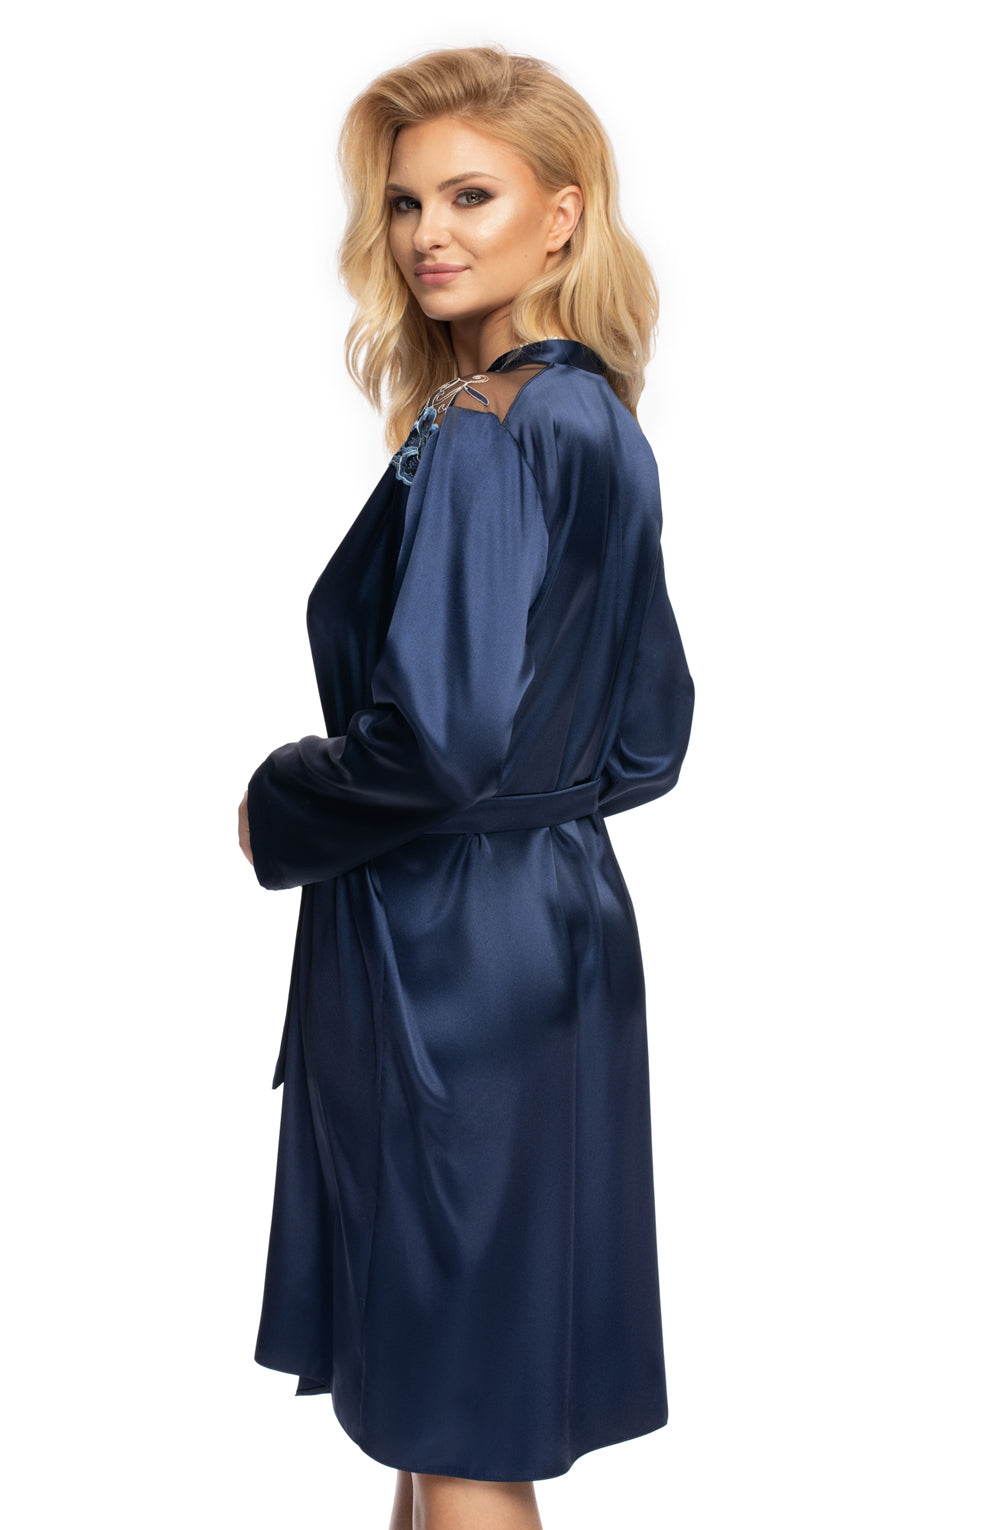 Vibrators, Sex Toy Kits and Sex Toys at Cloud9Adults - Irall Elodie Dressing Gown Navy - Buy Sex Toys Online